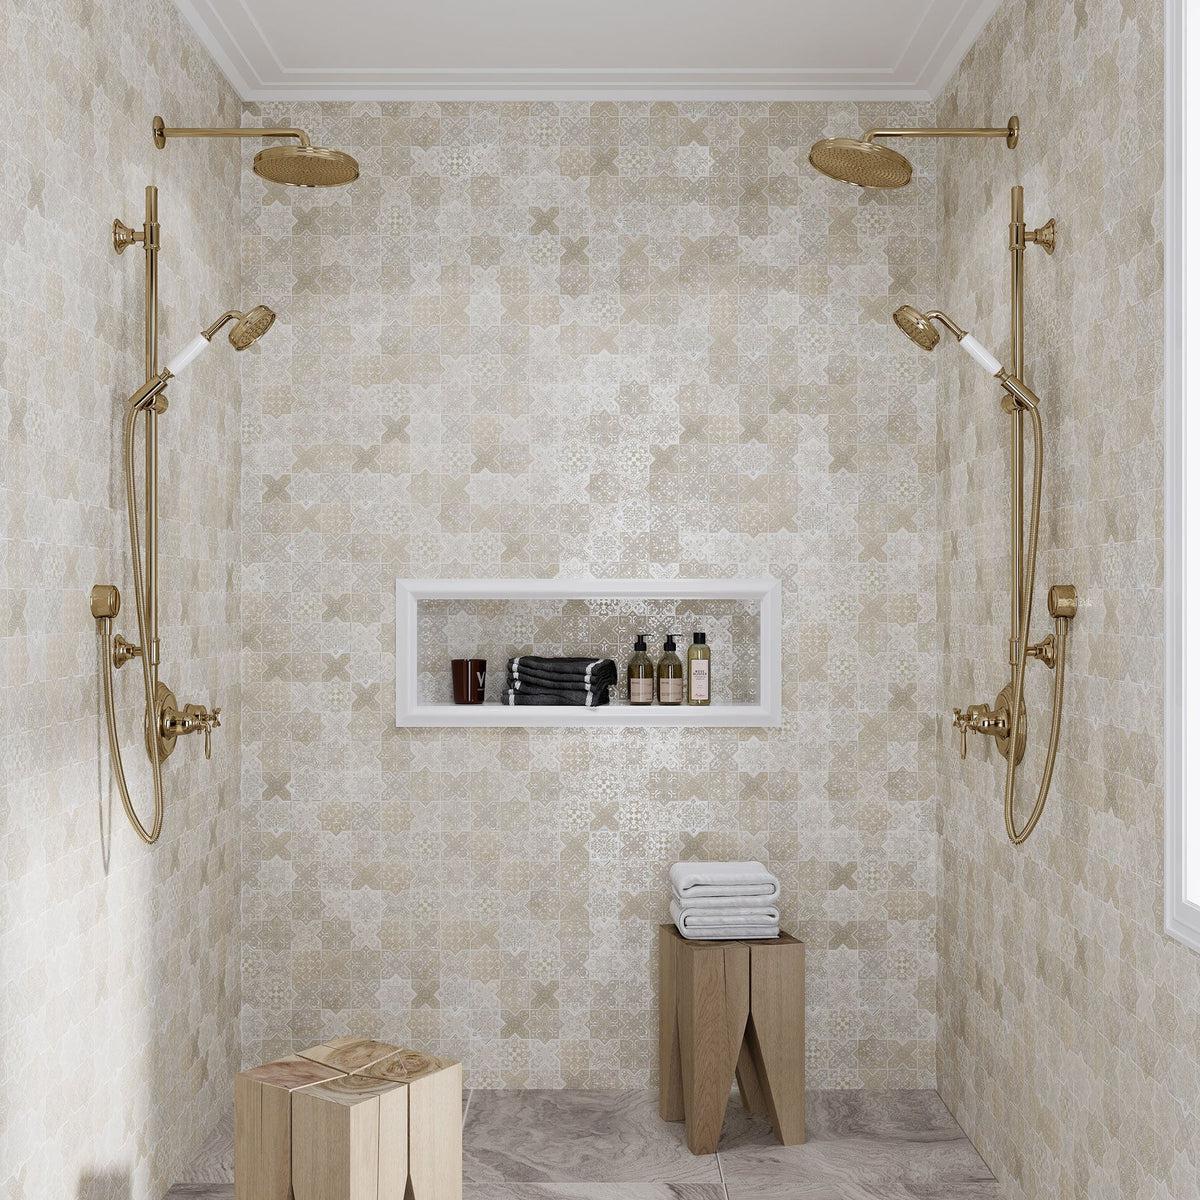 Bathroom with double brass shower and cream wall tile